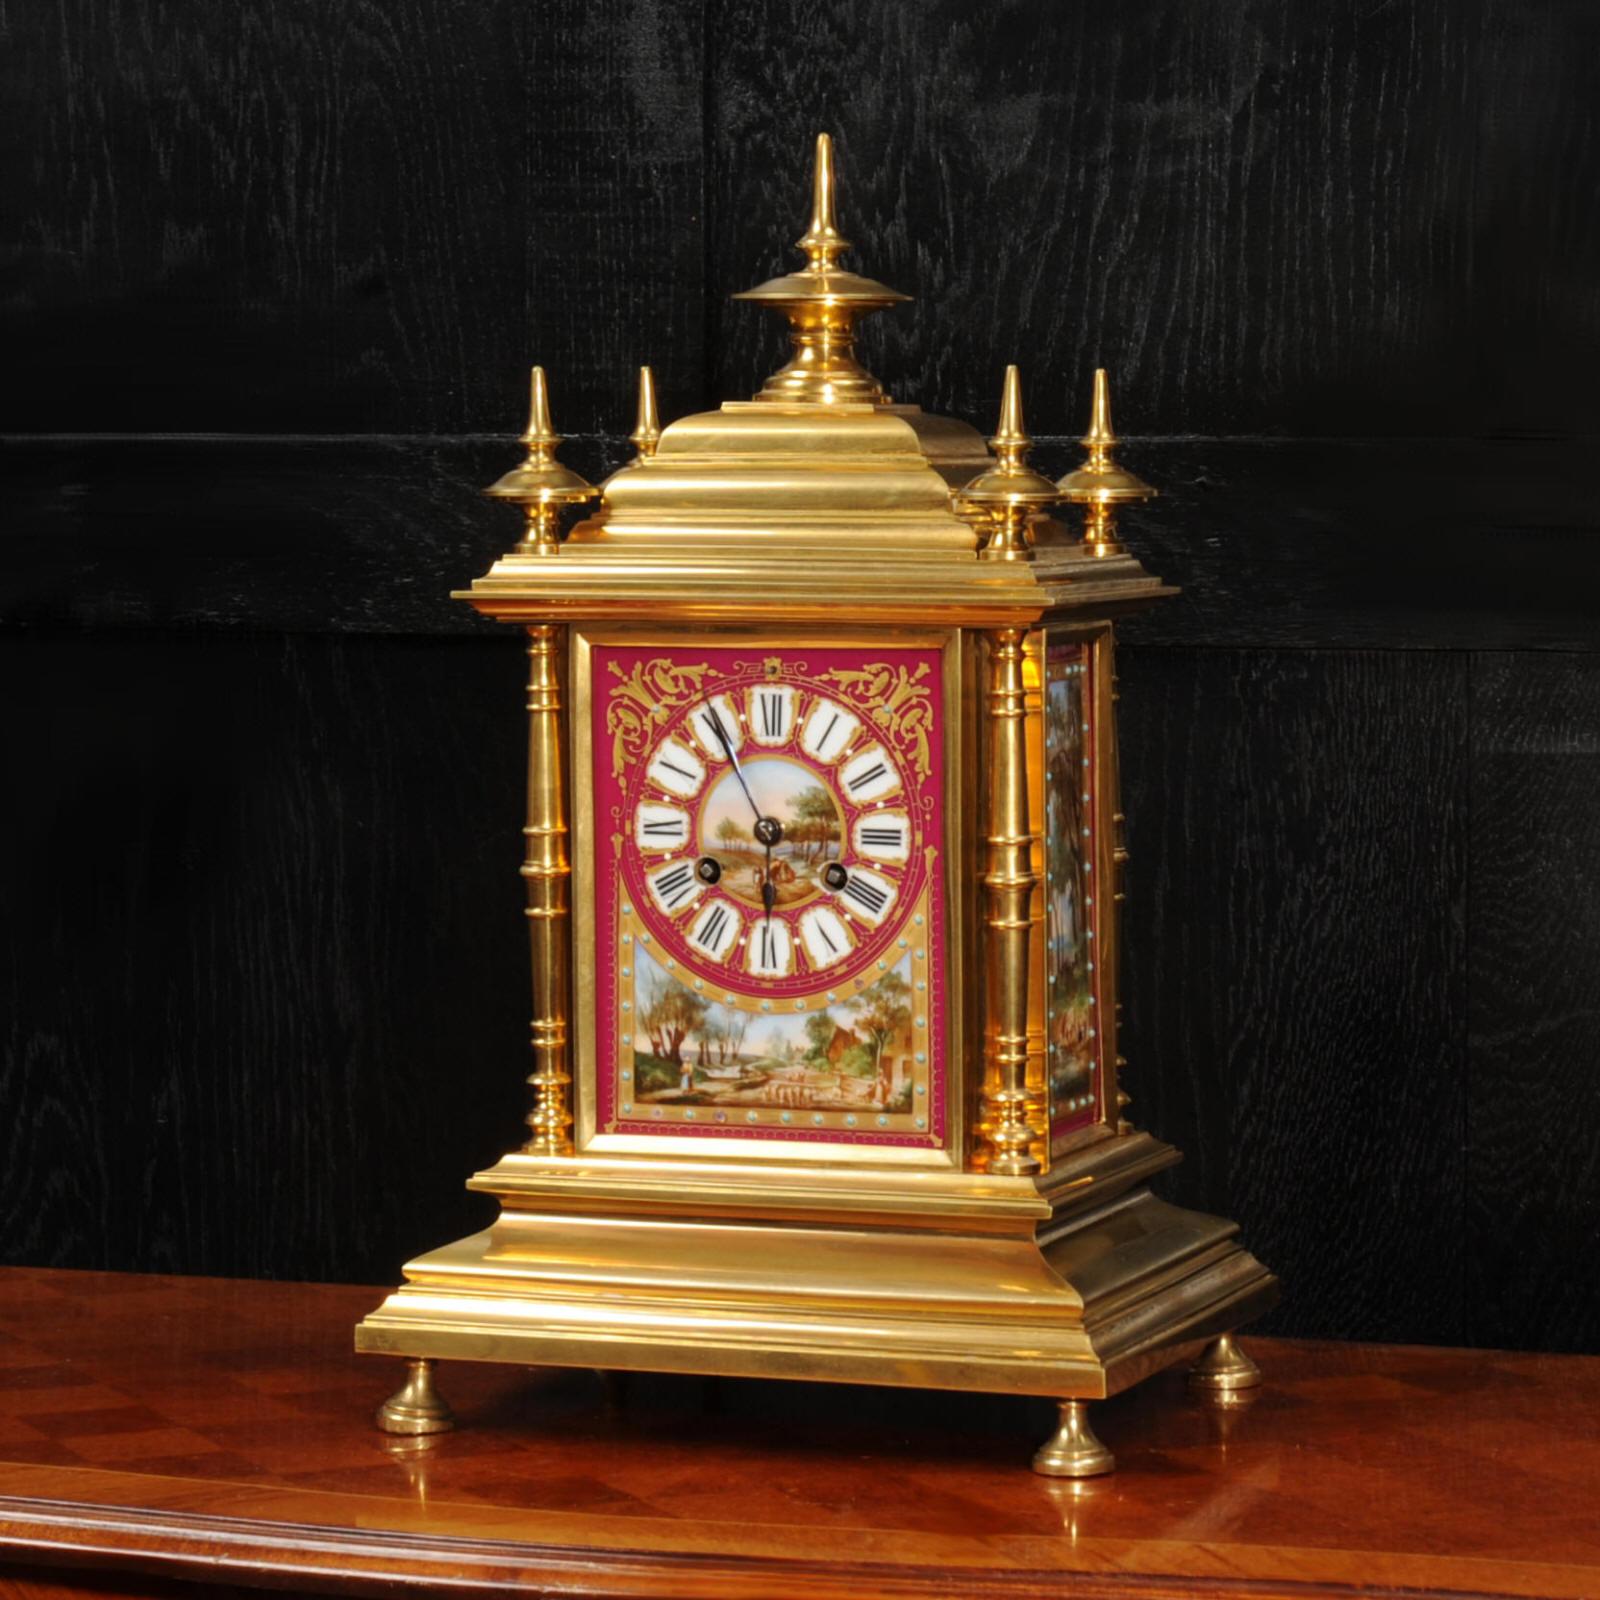 A magnificent ormolu (finely gilded bronze) and Sèvres style porcelain clock by renown maker Achille Brocot. It is of a beautifully chic design, four turned corner columns with a cushion shaped top with 5 finials. The front and sides are mounted